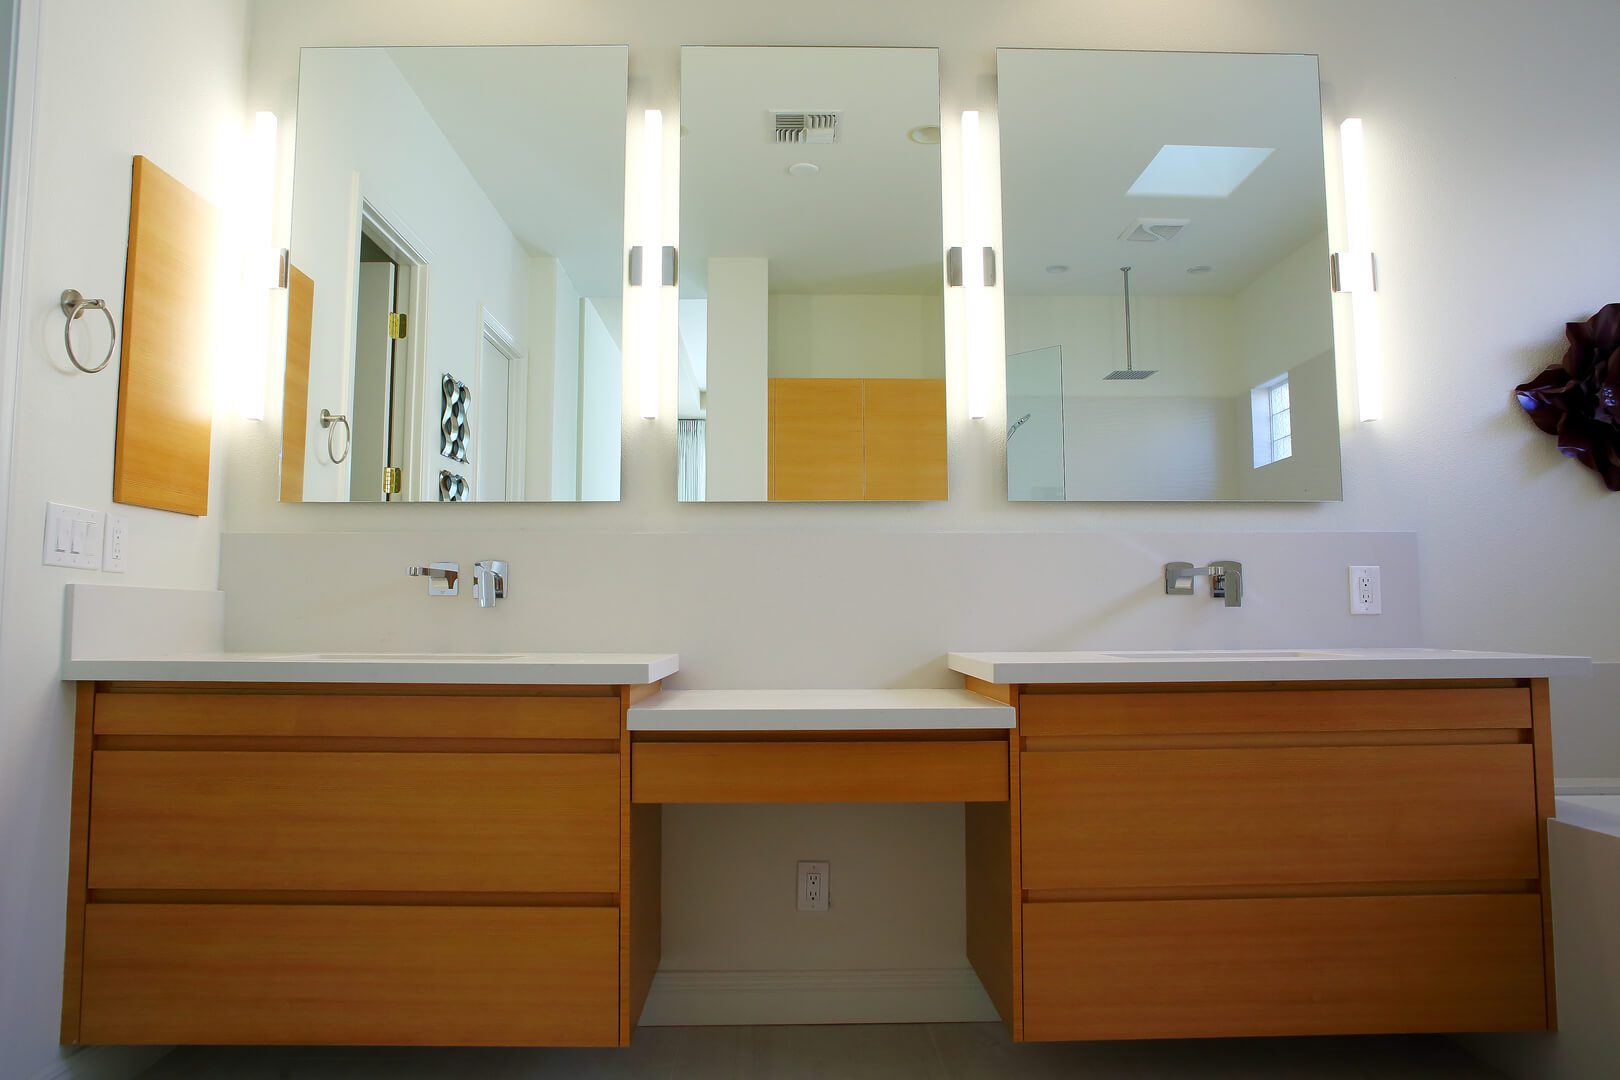 A bathroom with two sinks and three mirrors.